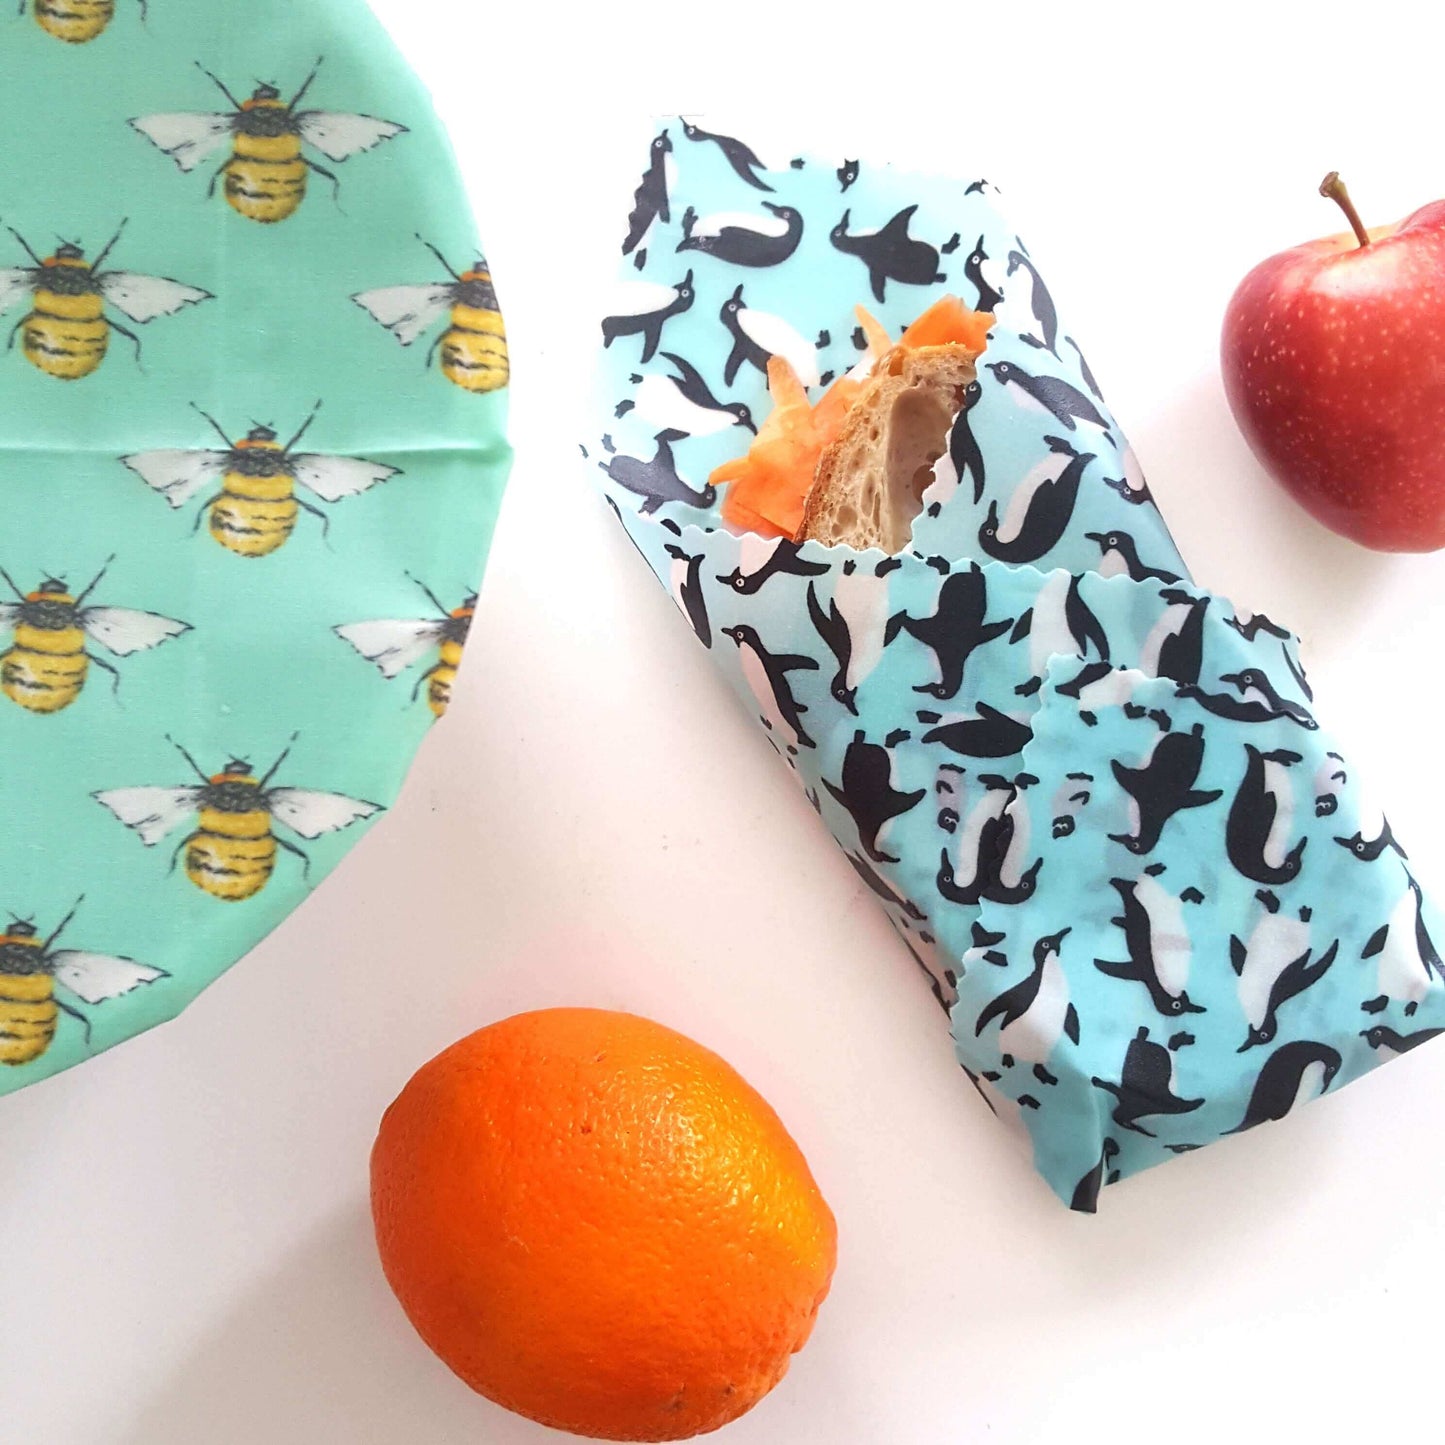 Wings Earth Kind Sandwich & Bowl Set of 2 Large Beeswax Wraps shown in use